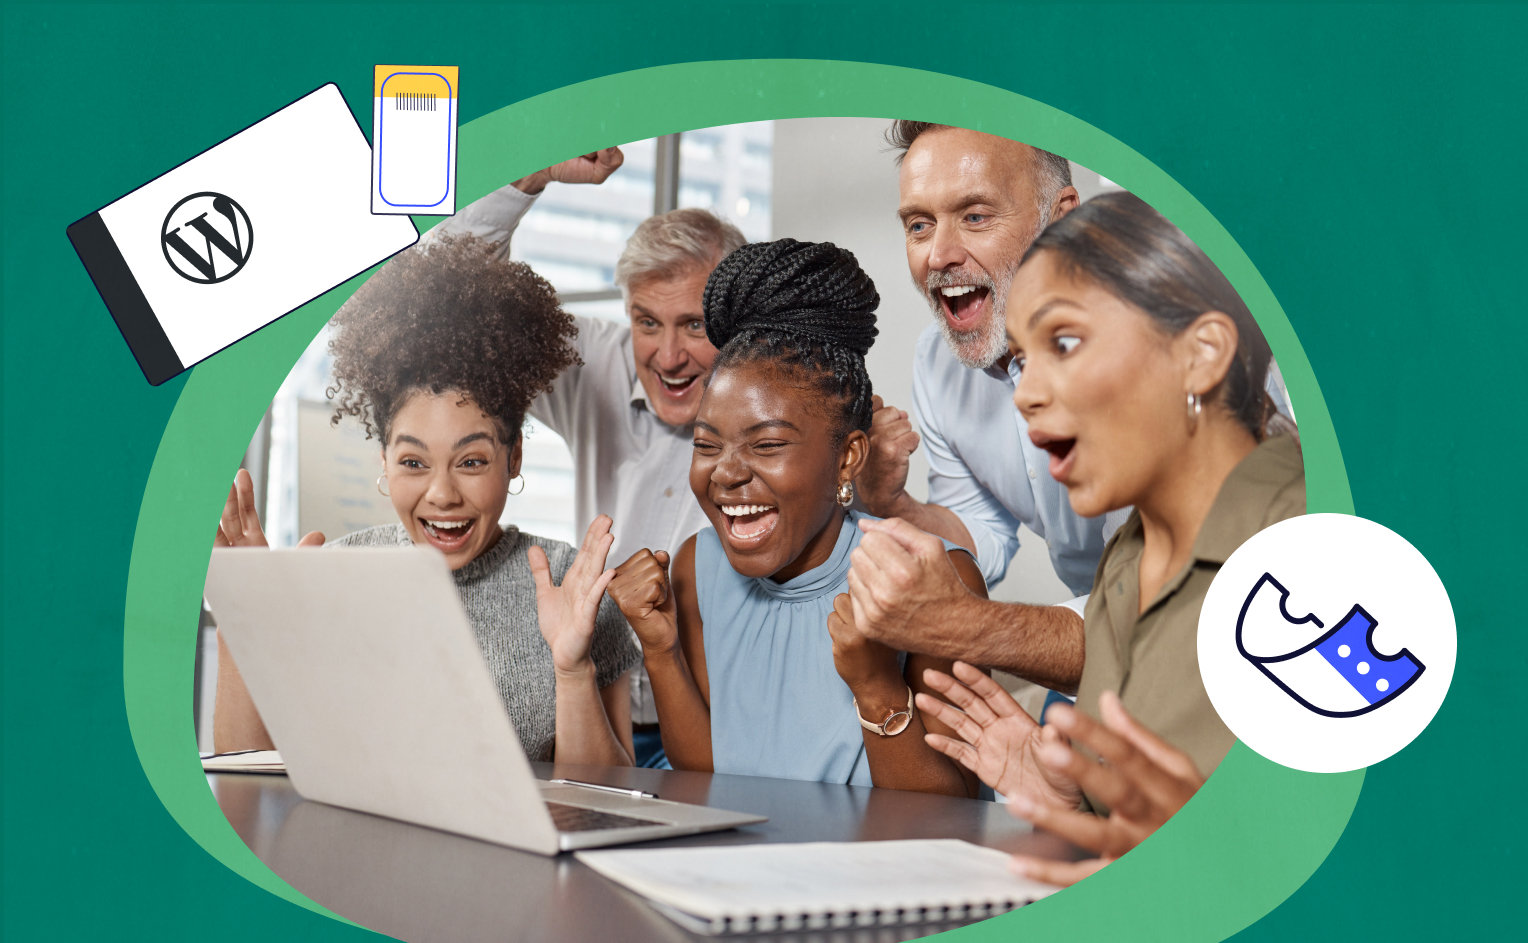 group of people celebrating around a computer